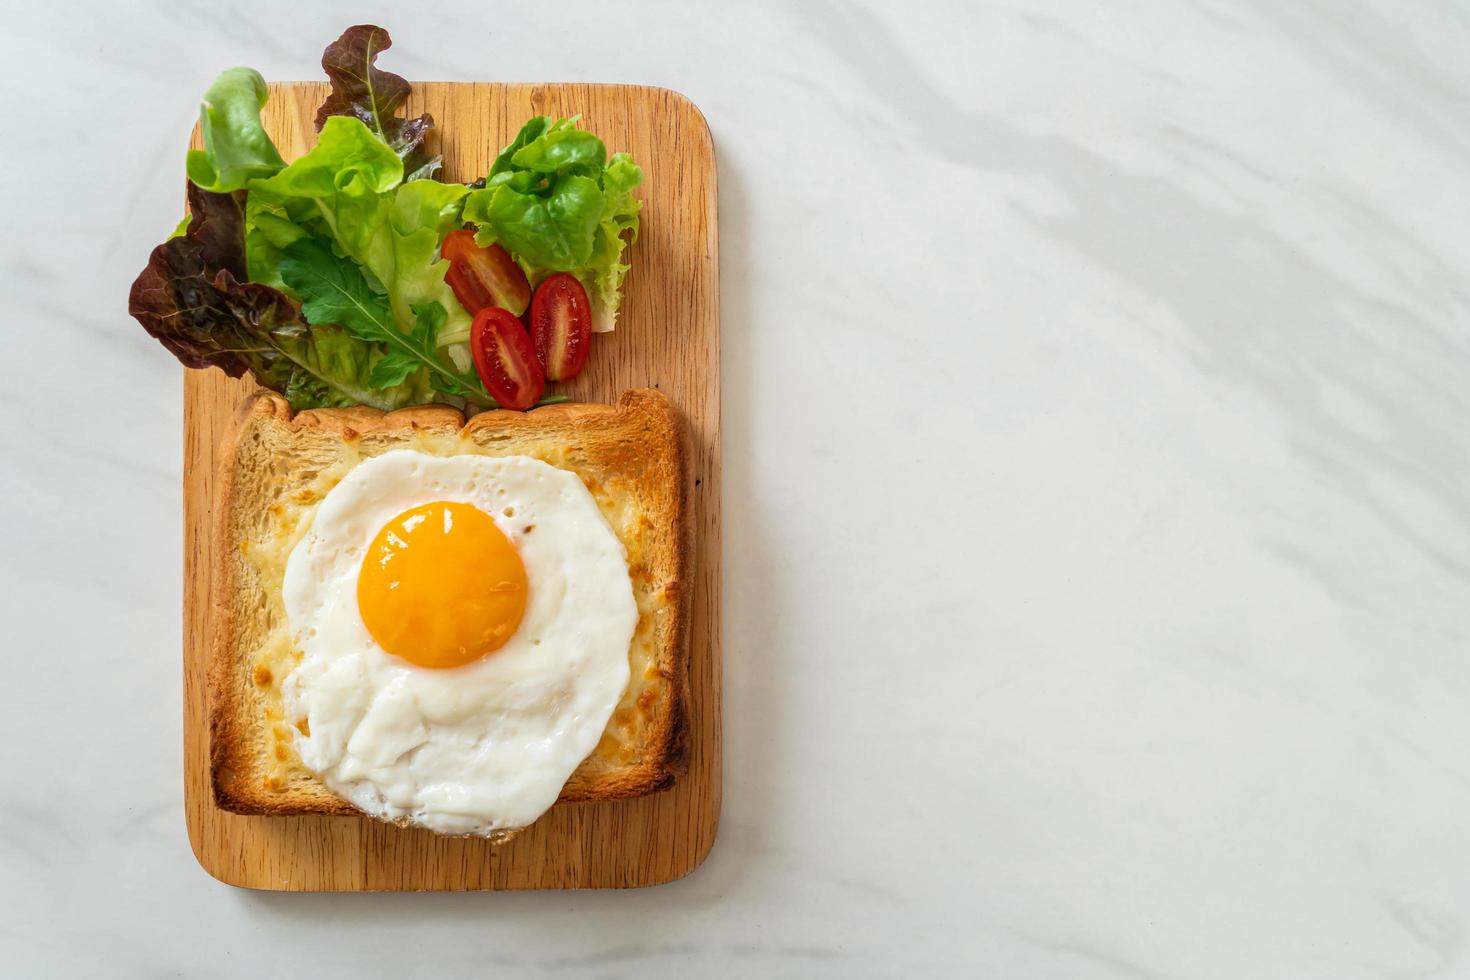 Homemade bread toasted with cheese and fried egg on top with vegetable salad for breakfast photo